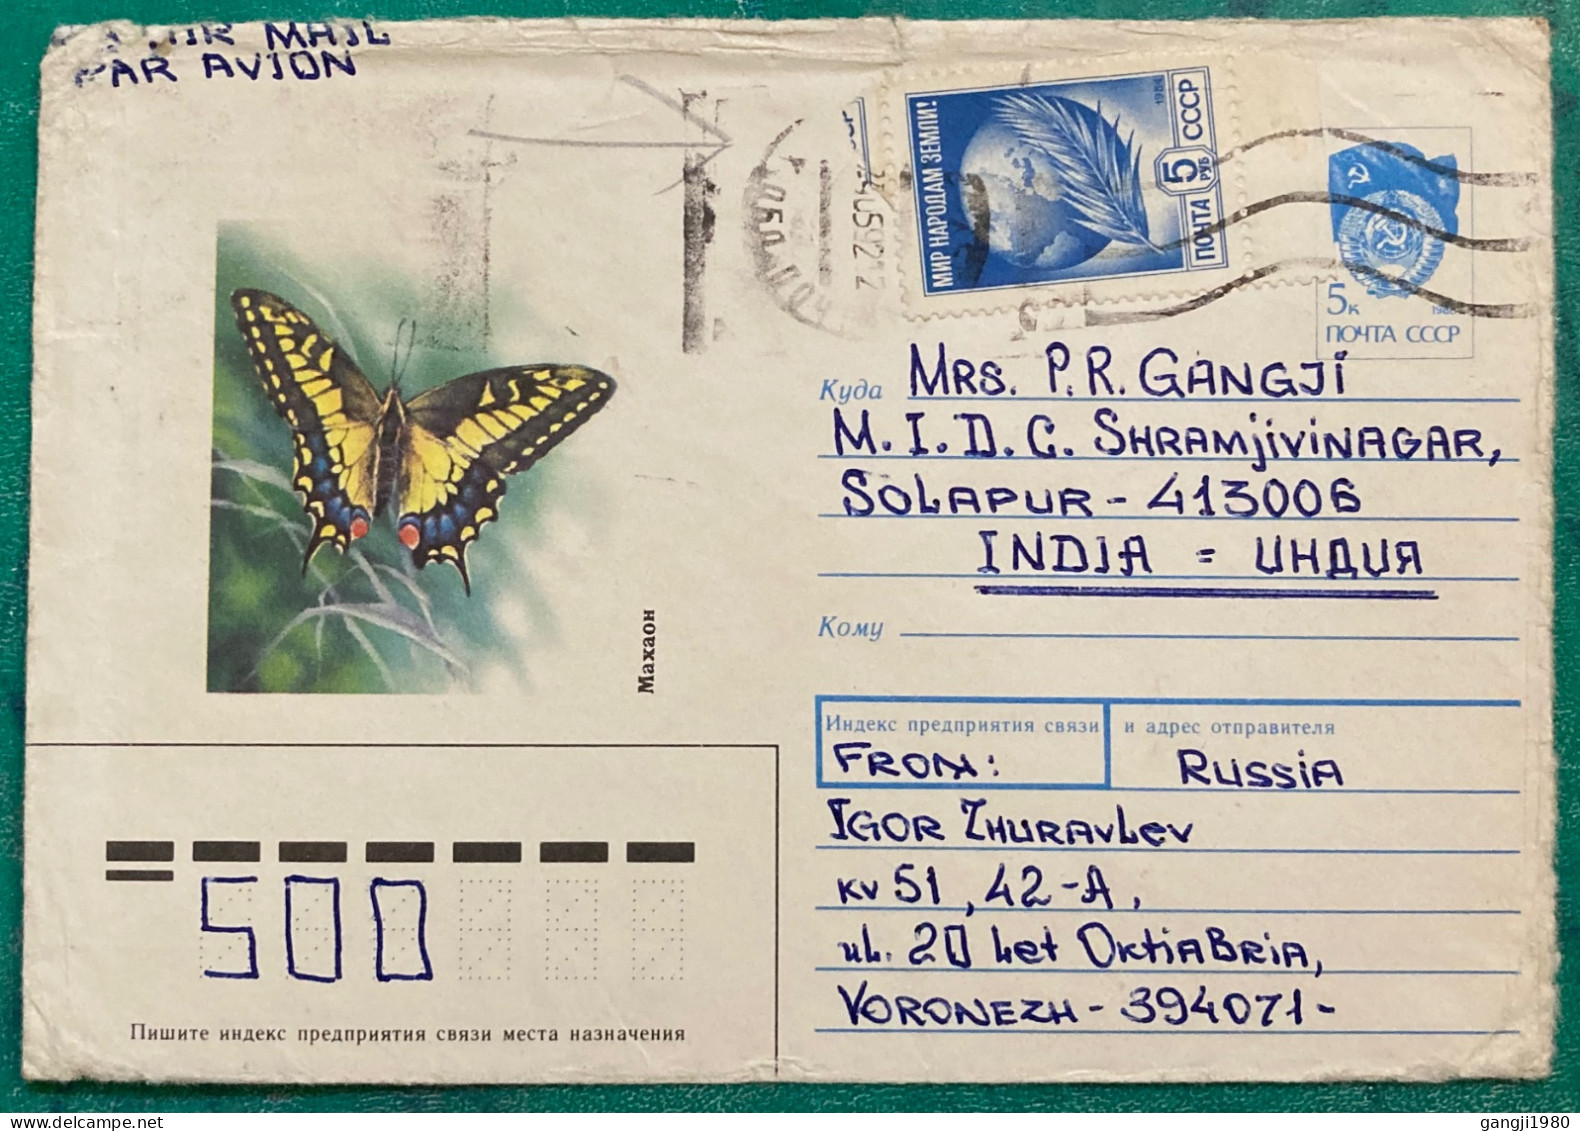 RUSSIA TO INDIA COVER USED 1992, STATIONERY COVER, ILLUSTRATE, BUTTERFLY,  GLOBE & FEATHER, COAT OF ARM FLAG, KORONEZ CI - Brieven En Documenten